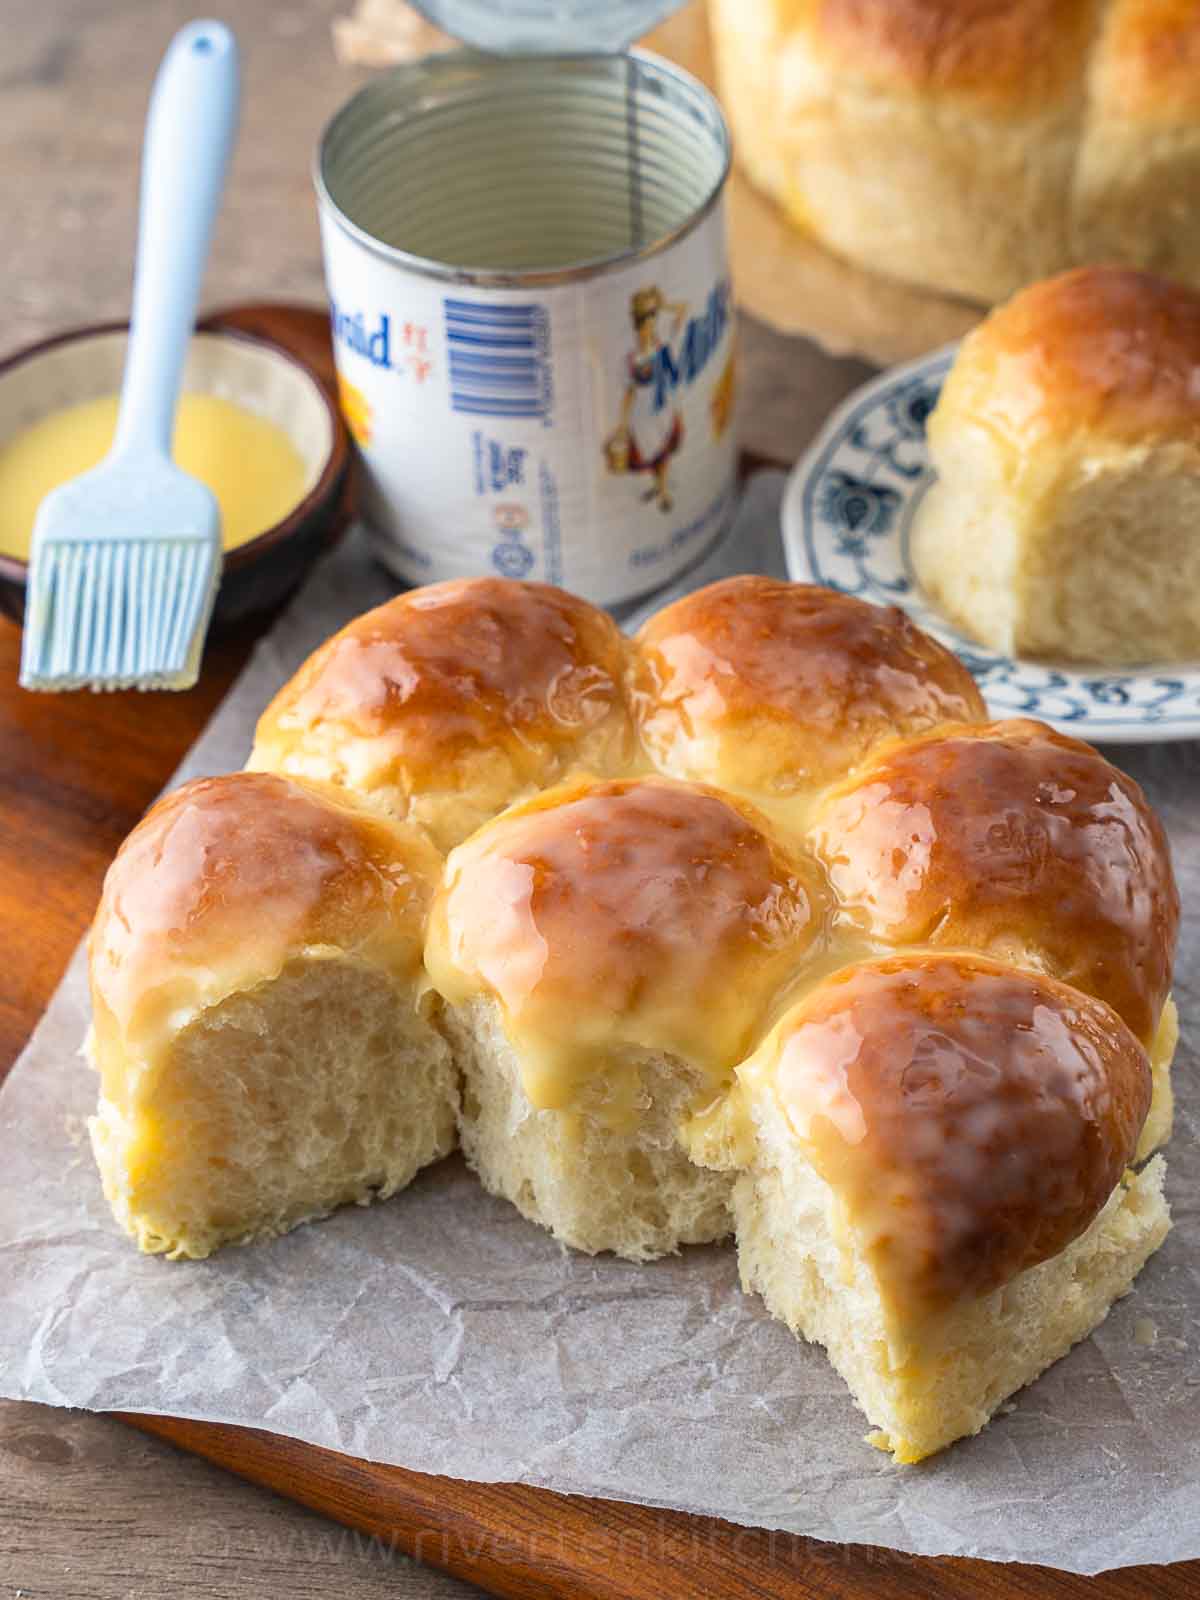 soft milk bread glazed with butter and condensed milk.